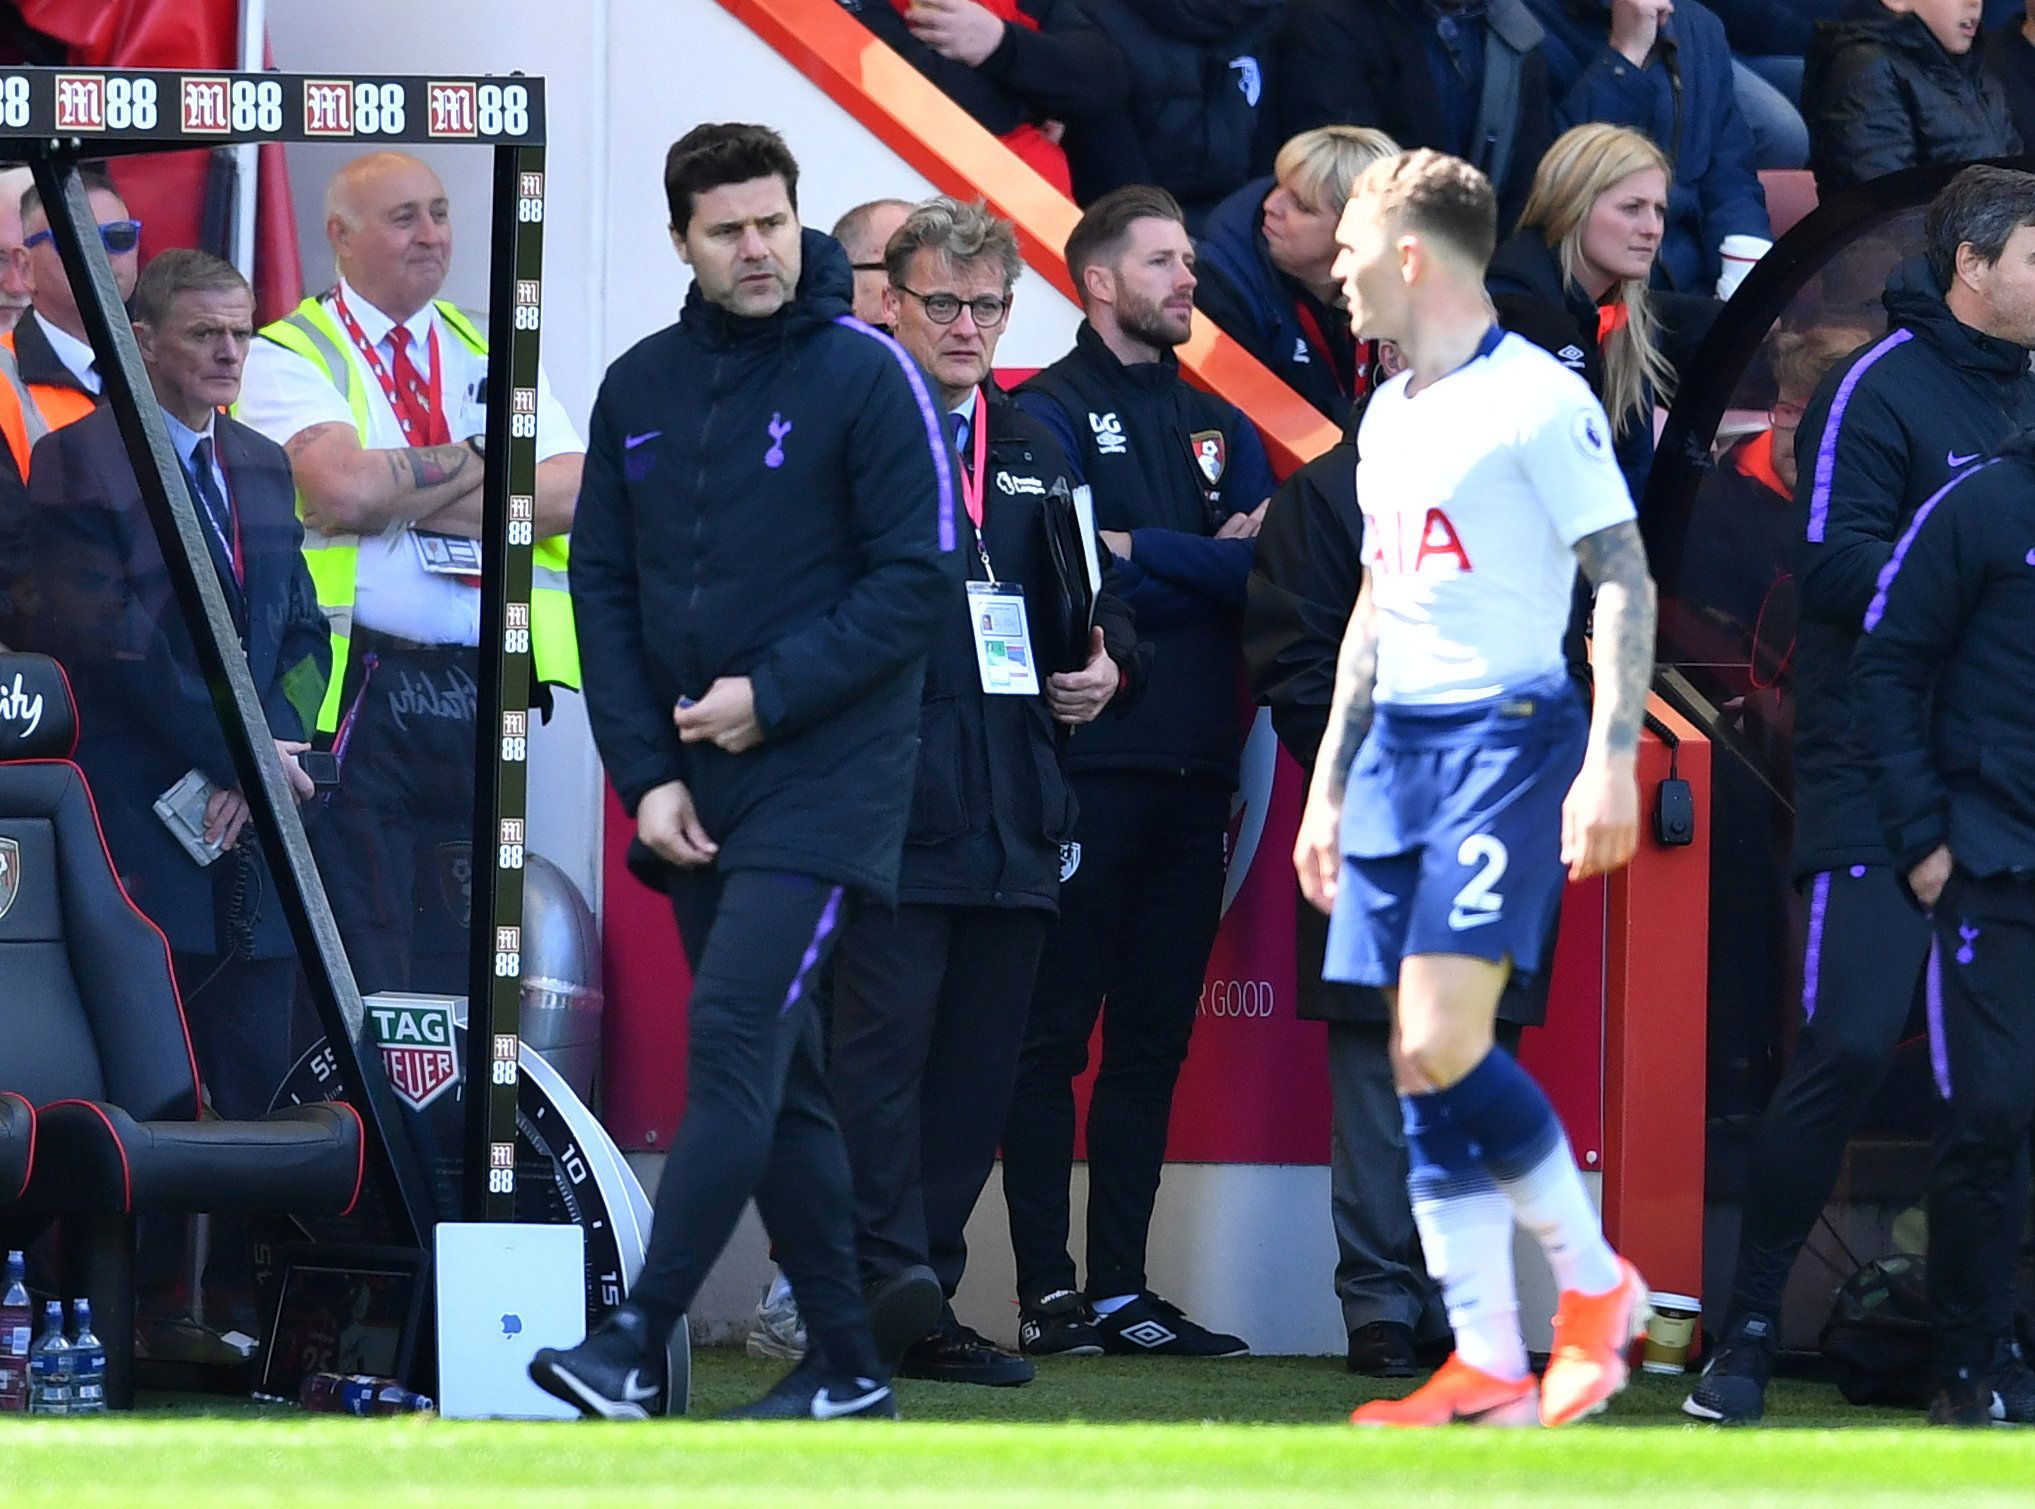 Soccer Football - Premier League - AFC Bournemouth v Tottenham Hotspur - Vitality Stadium, Bournemouth, Britain - May 4, 2019  Tottenham manager Mauricio Pochettino gives instructions to Kieran Trippier   REUTERS/Dylan Martinez  EDITORIAL USE ONLY. No use with unauthorized audio, video, data, fixture lists, club/league logos or 